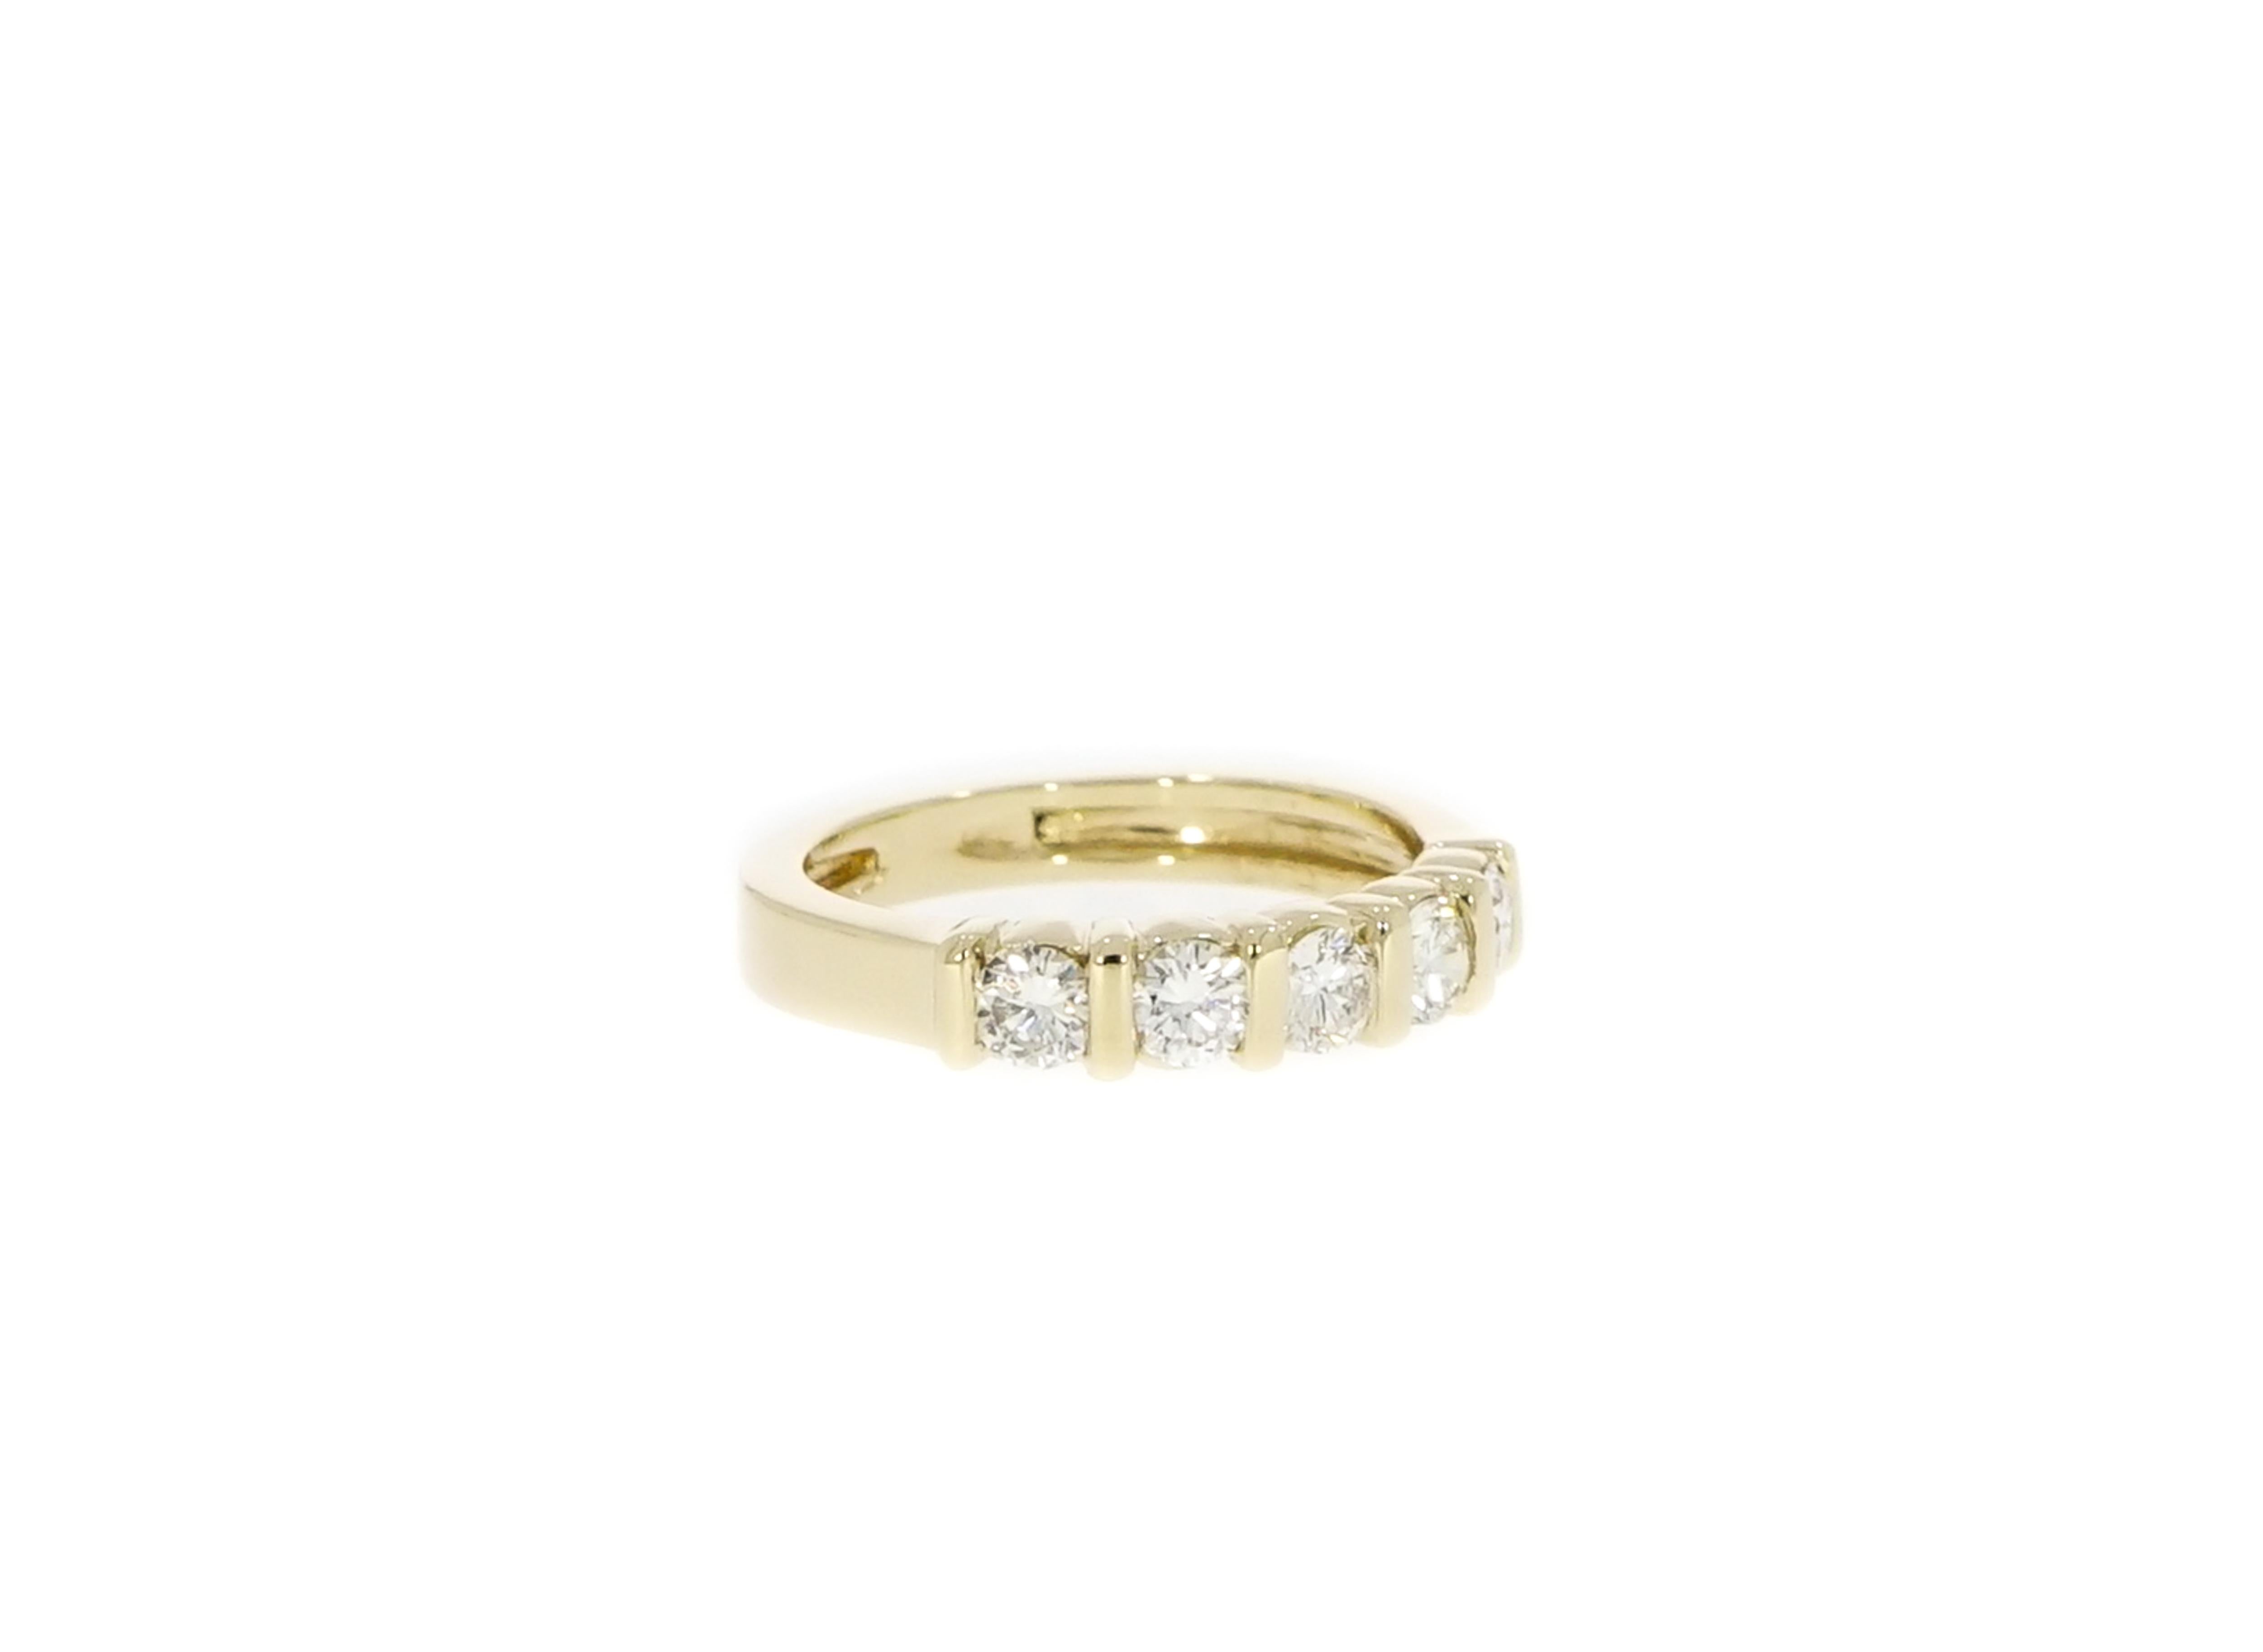 This classic and elegant design, is obtained by harmoniously setting the diamonds between gold bars creating an innovative band to celebrate your 5 year anniversary or just to wear with your existing rings.
Handcrafted in 14k yellow gold with 5